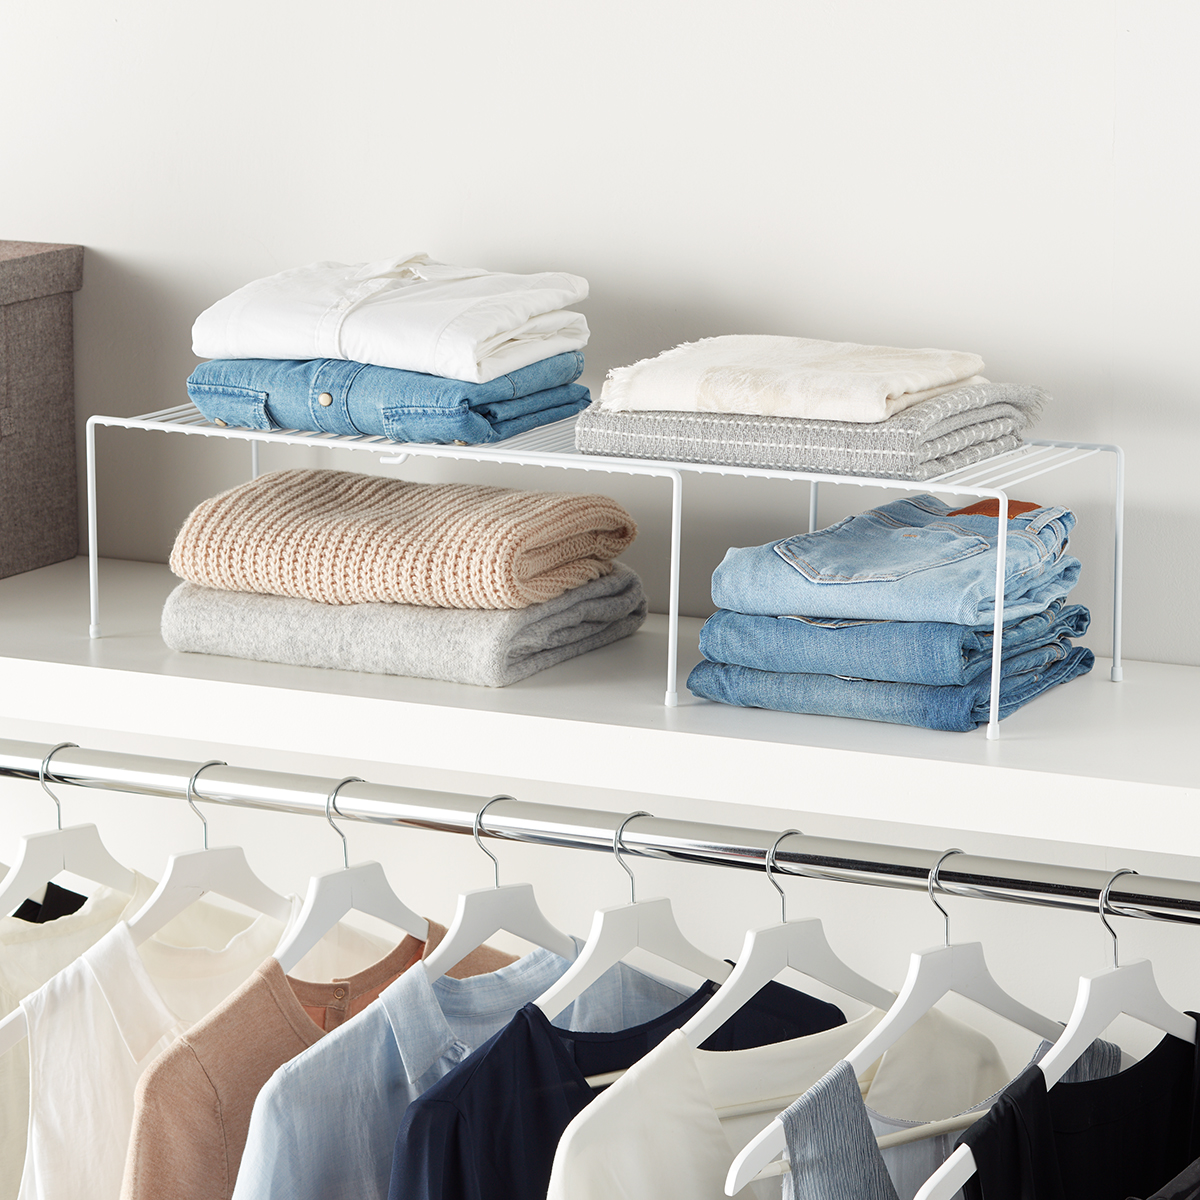 https://www.containerstore.com/catalogimages/413088/10077509_expandable_closet_shelf_whi.jpg